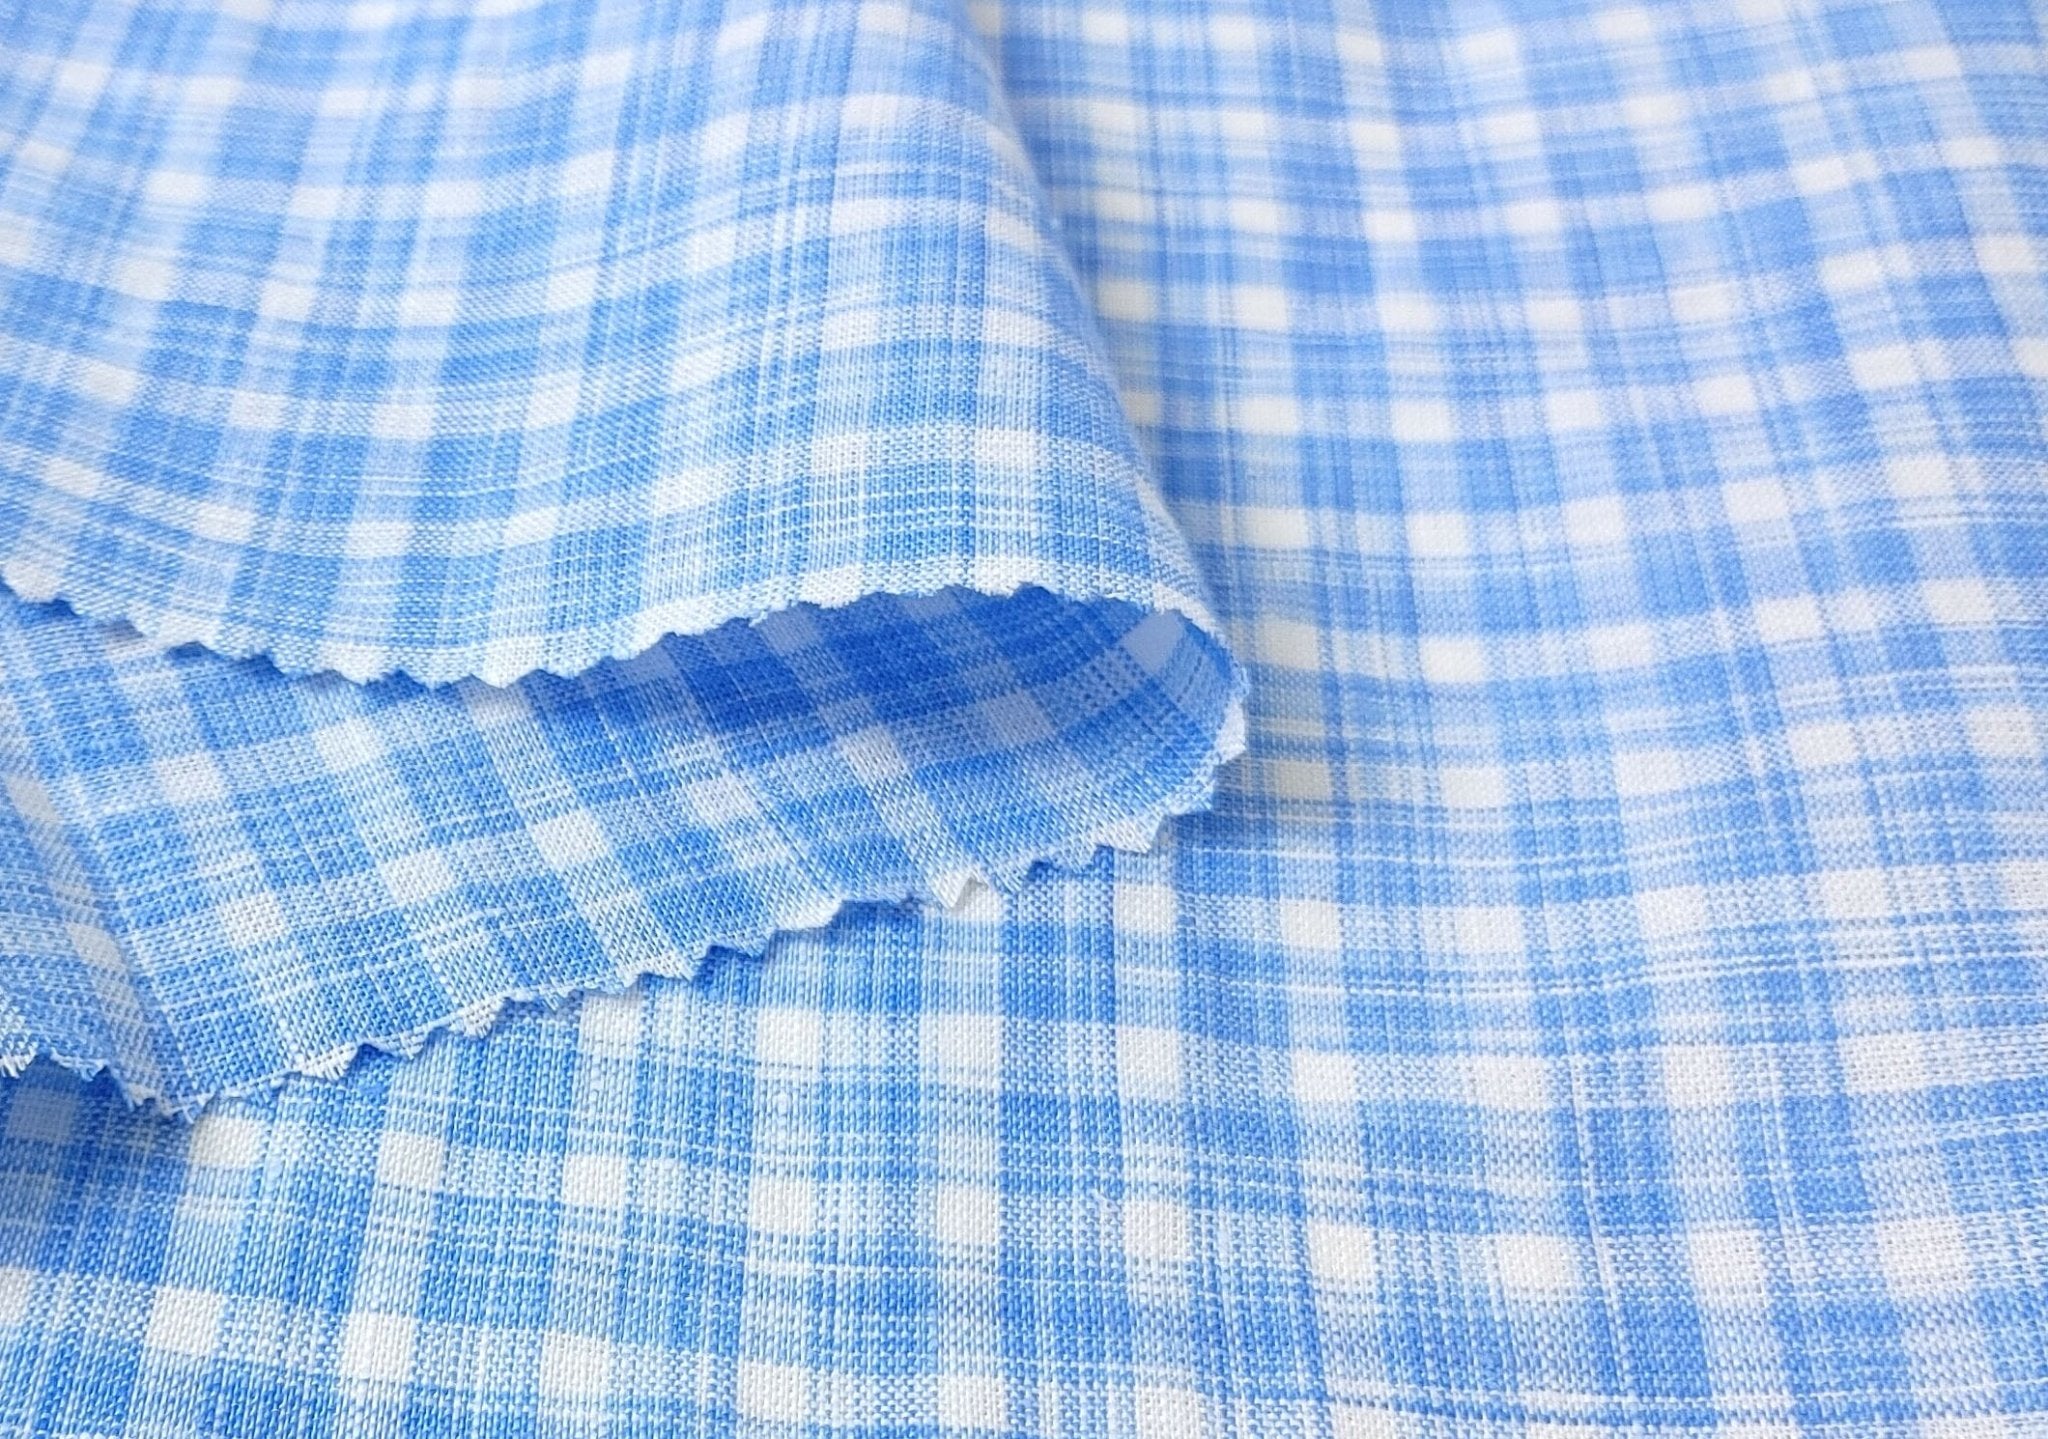 100% Linen Gingham Check Fabric in Space-Dyed Blue Yarn 7297 - The Linen Lab - Blue